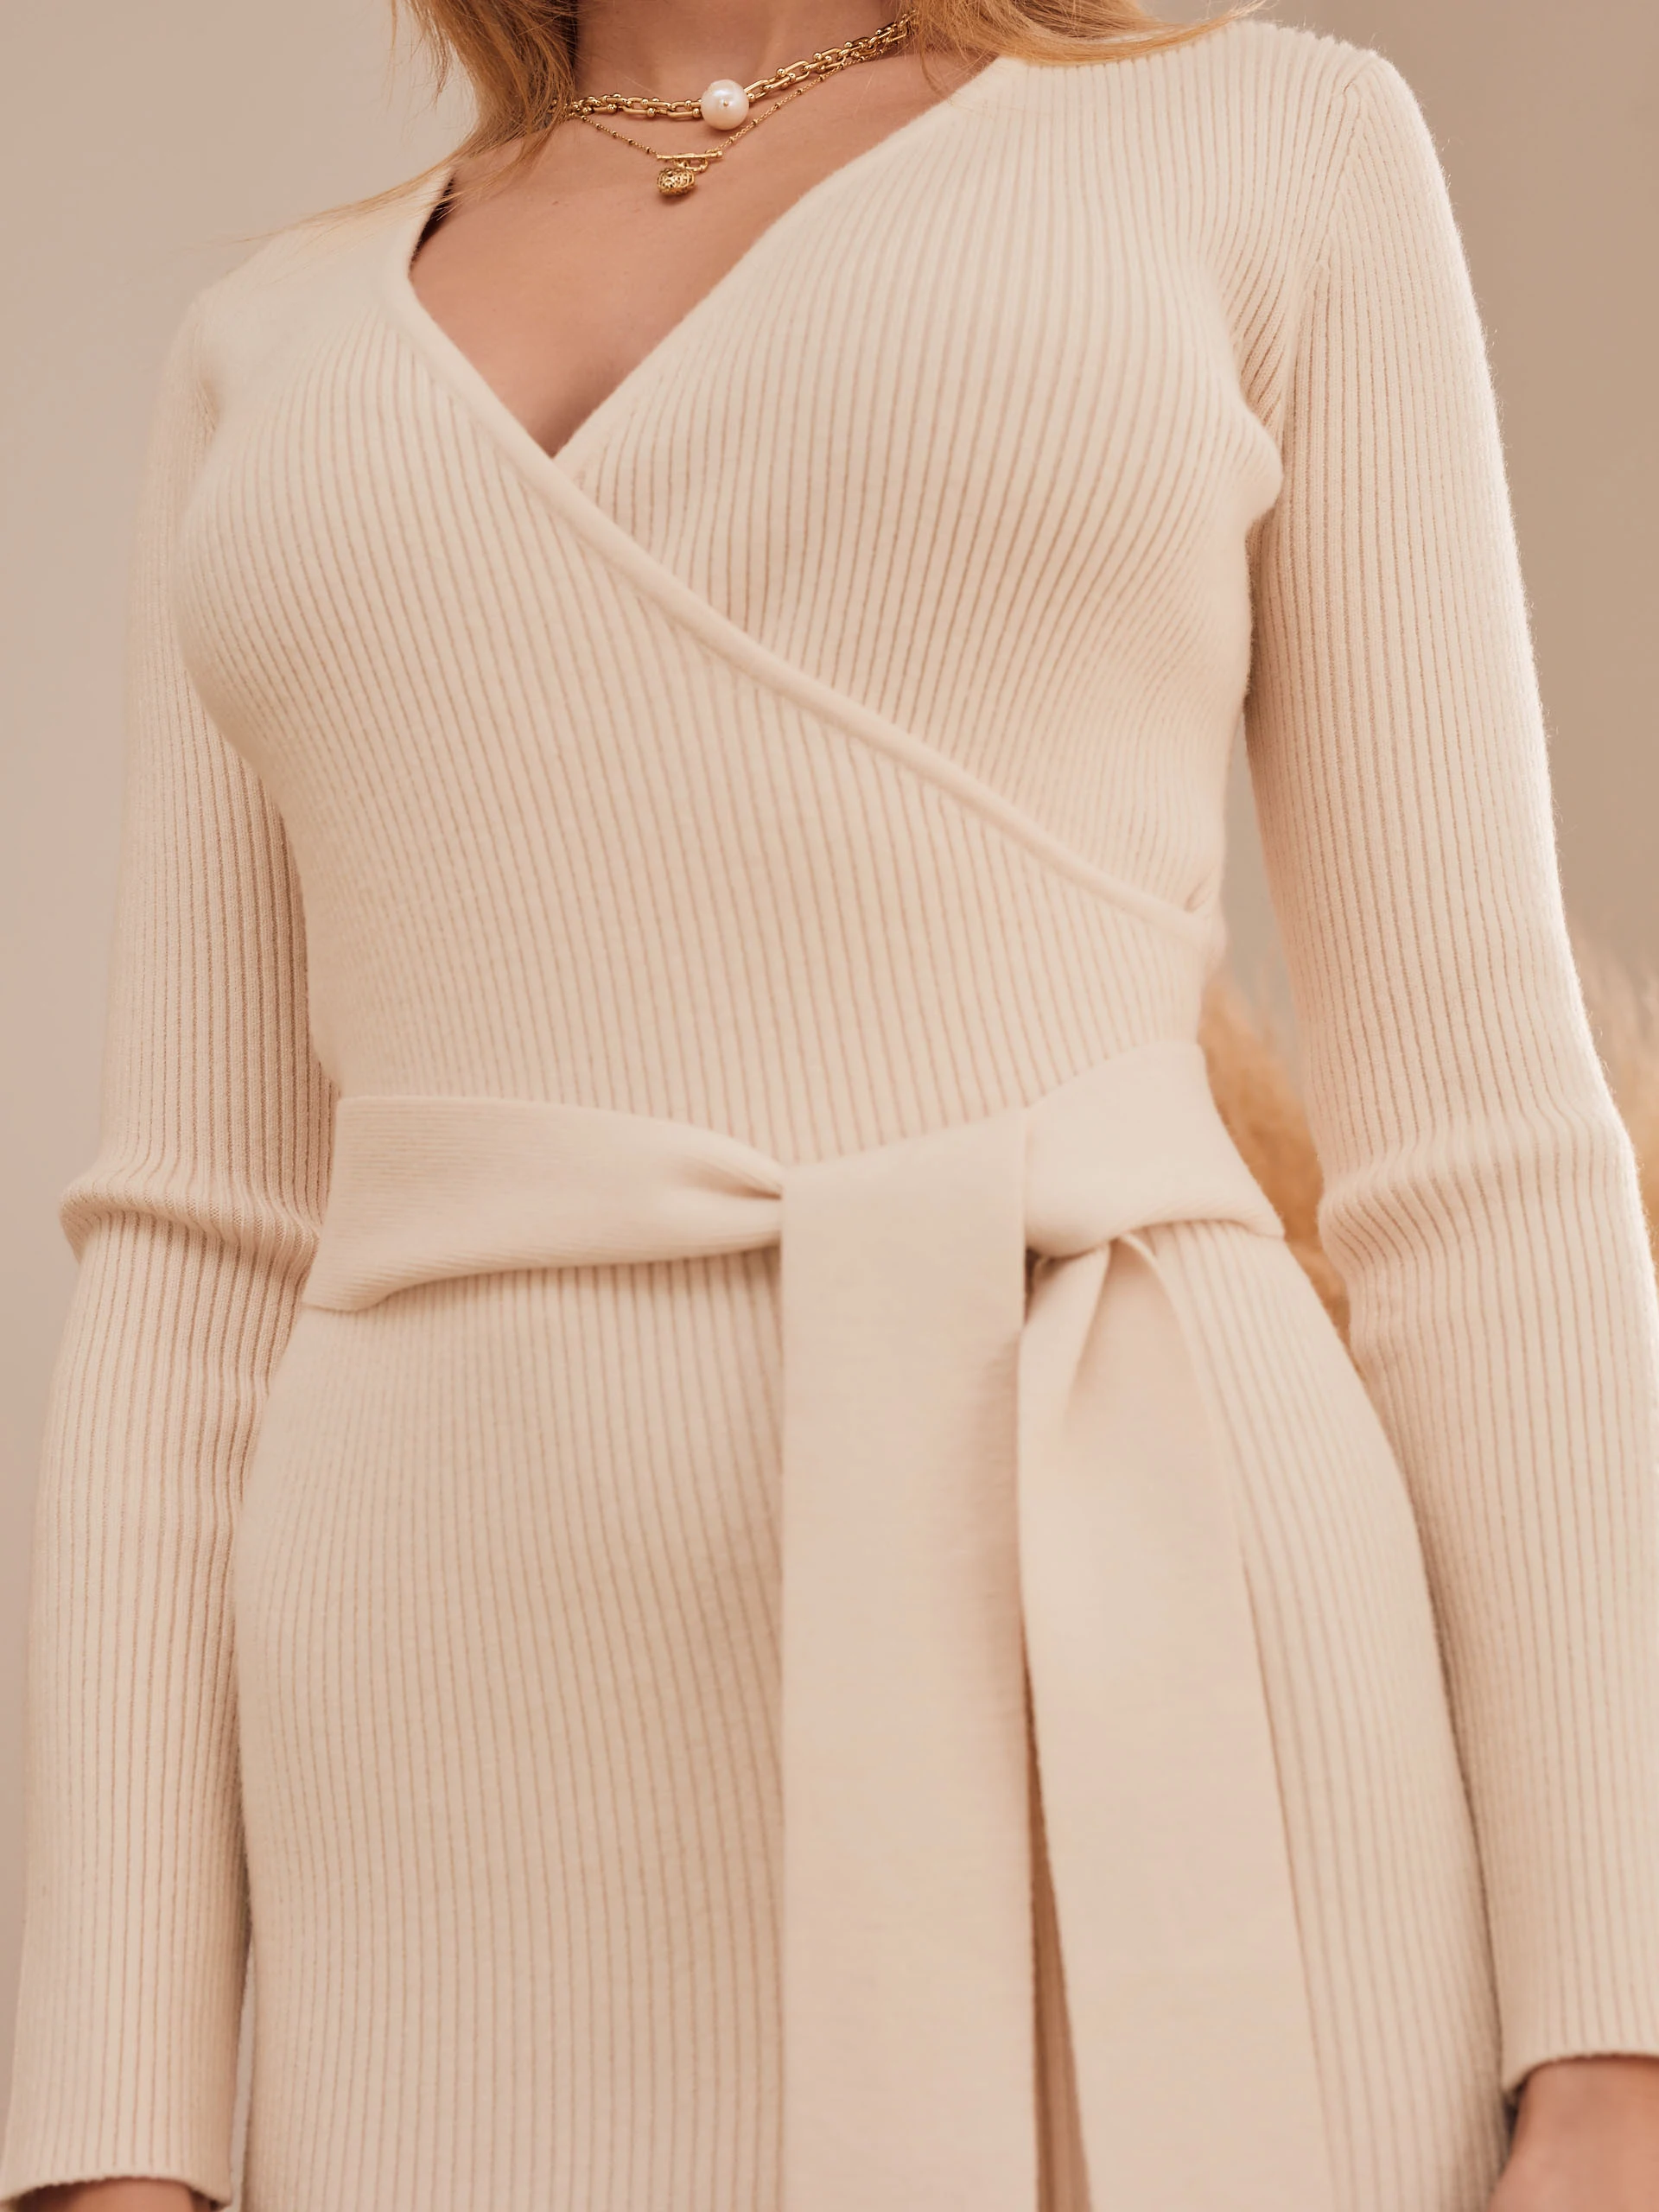 BEIGE KNITTED DRESS WITH BINDING